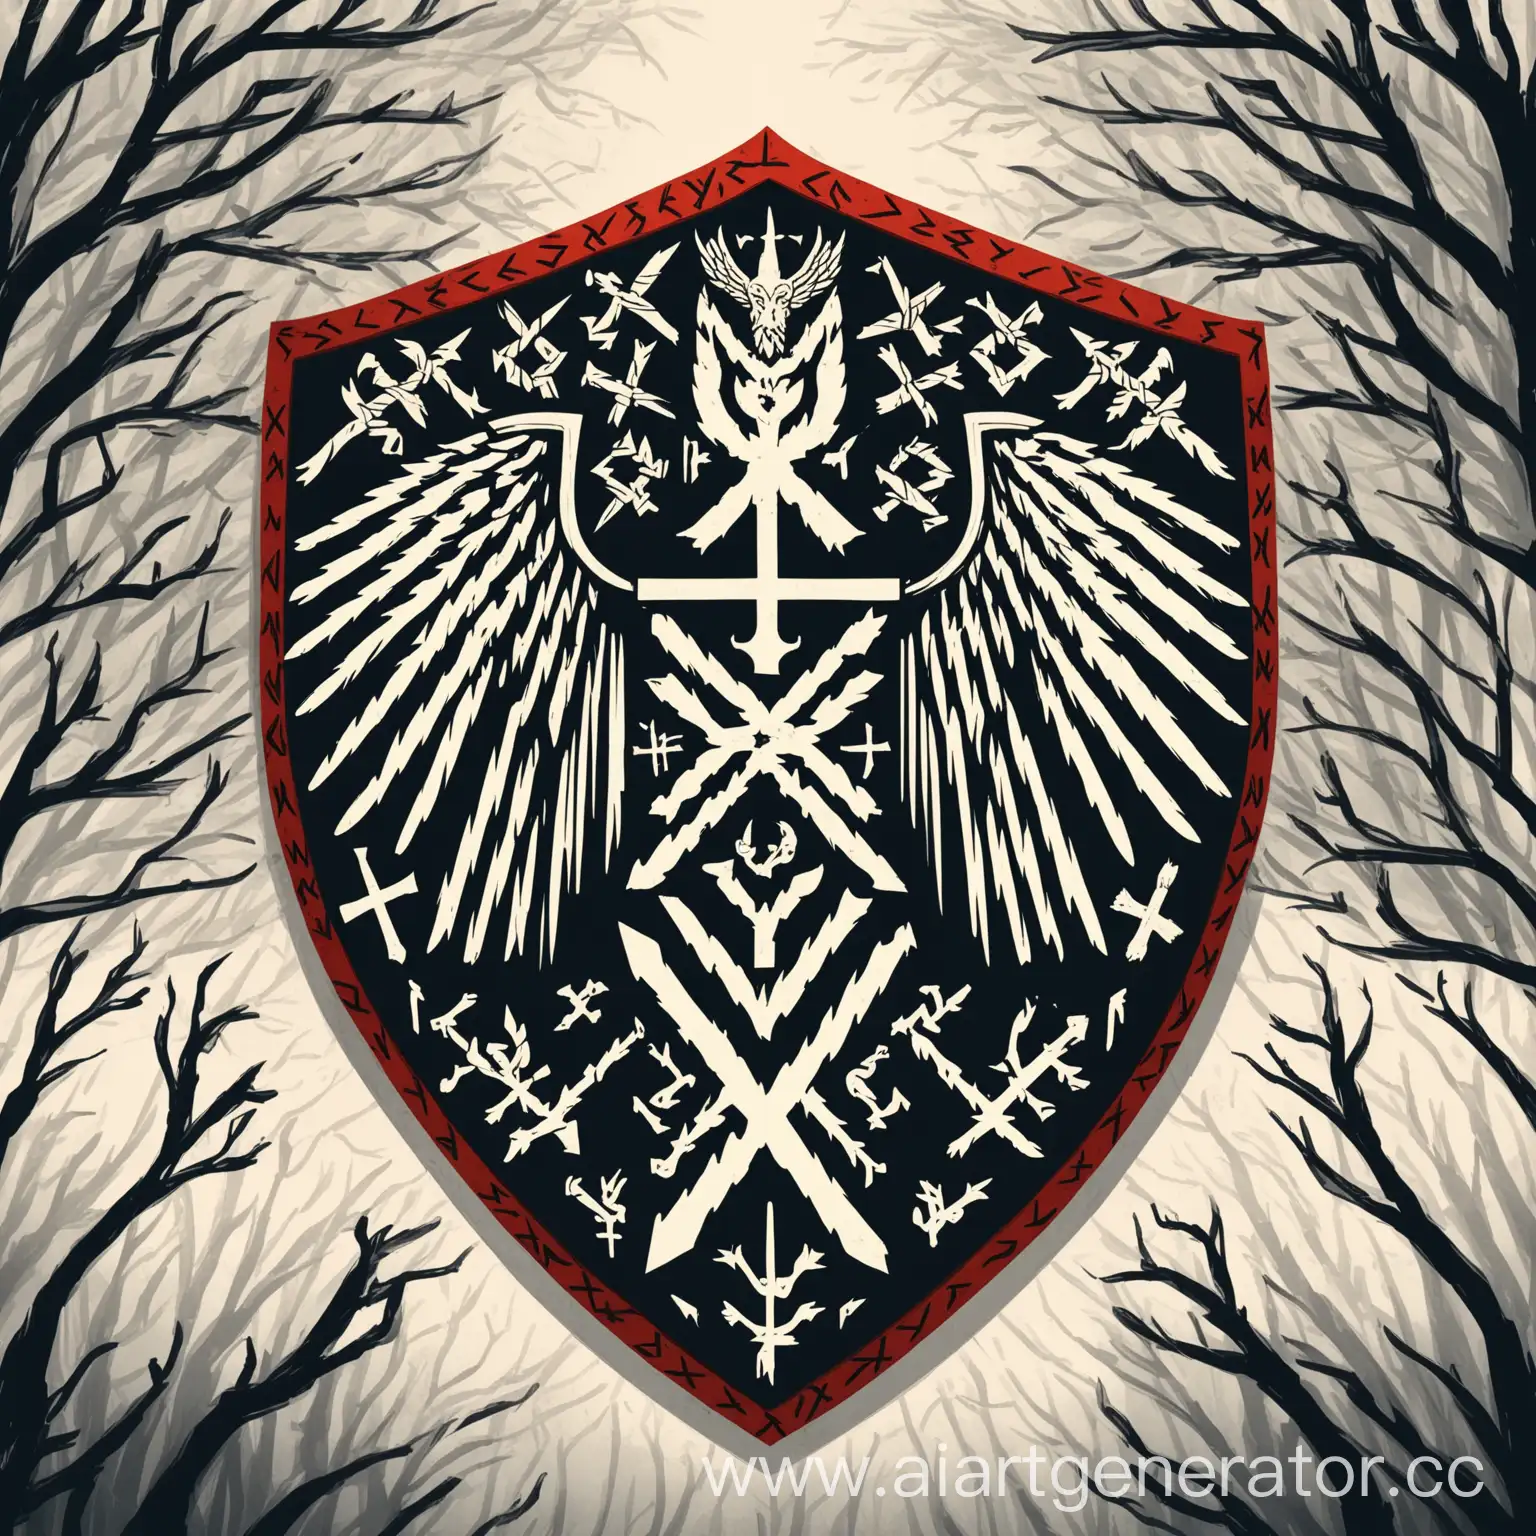 Minimalist-Slavic-Coat-of-Arms-with-Tree-and-Wings